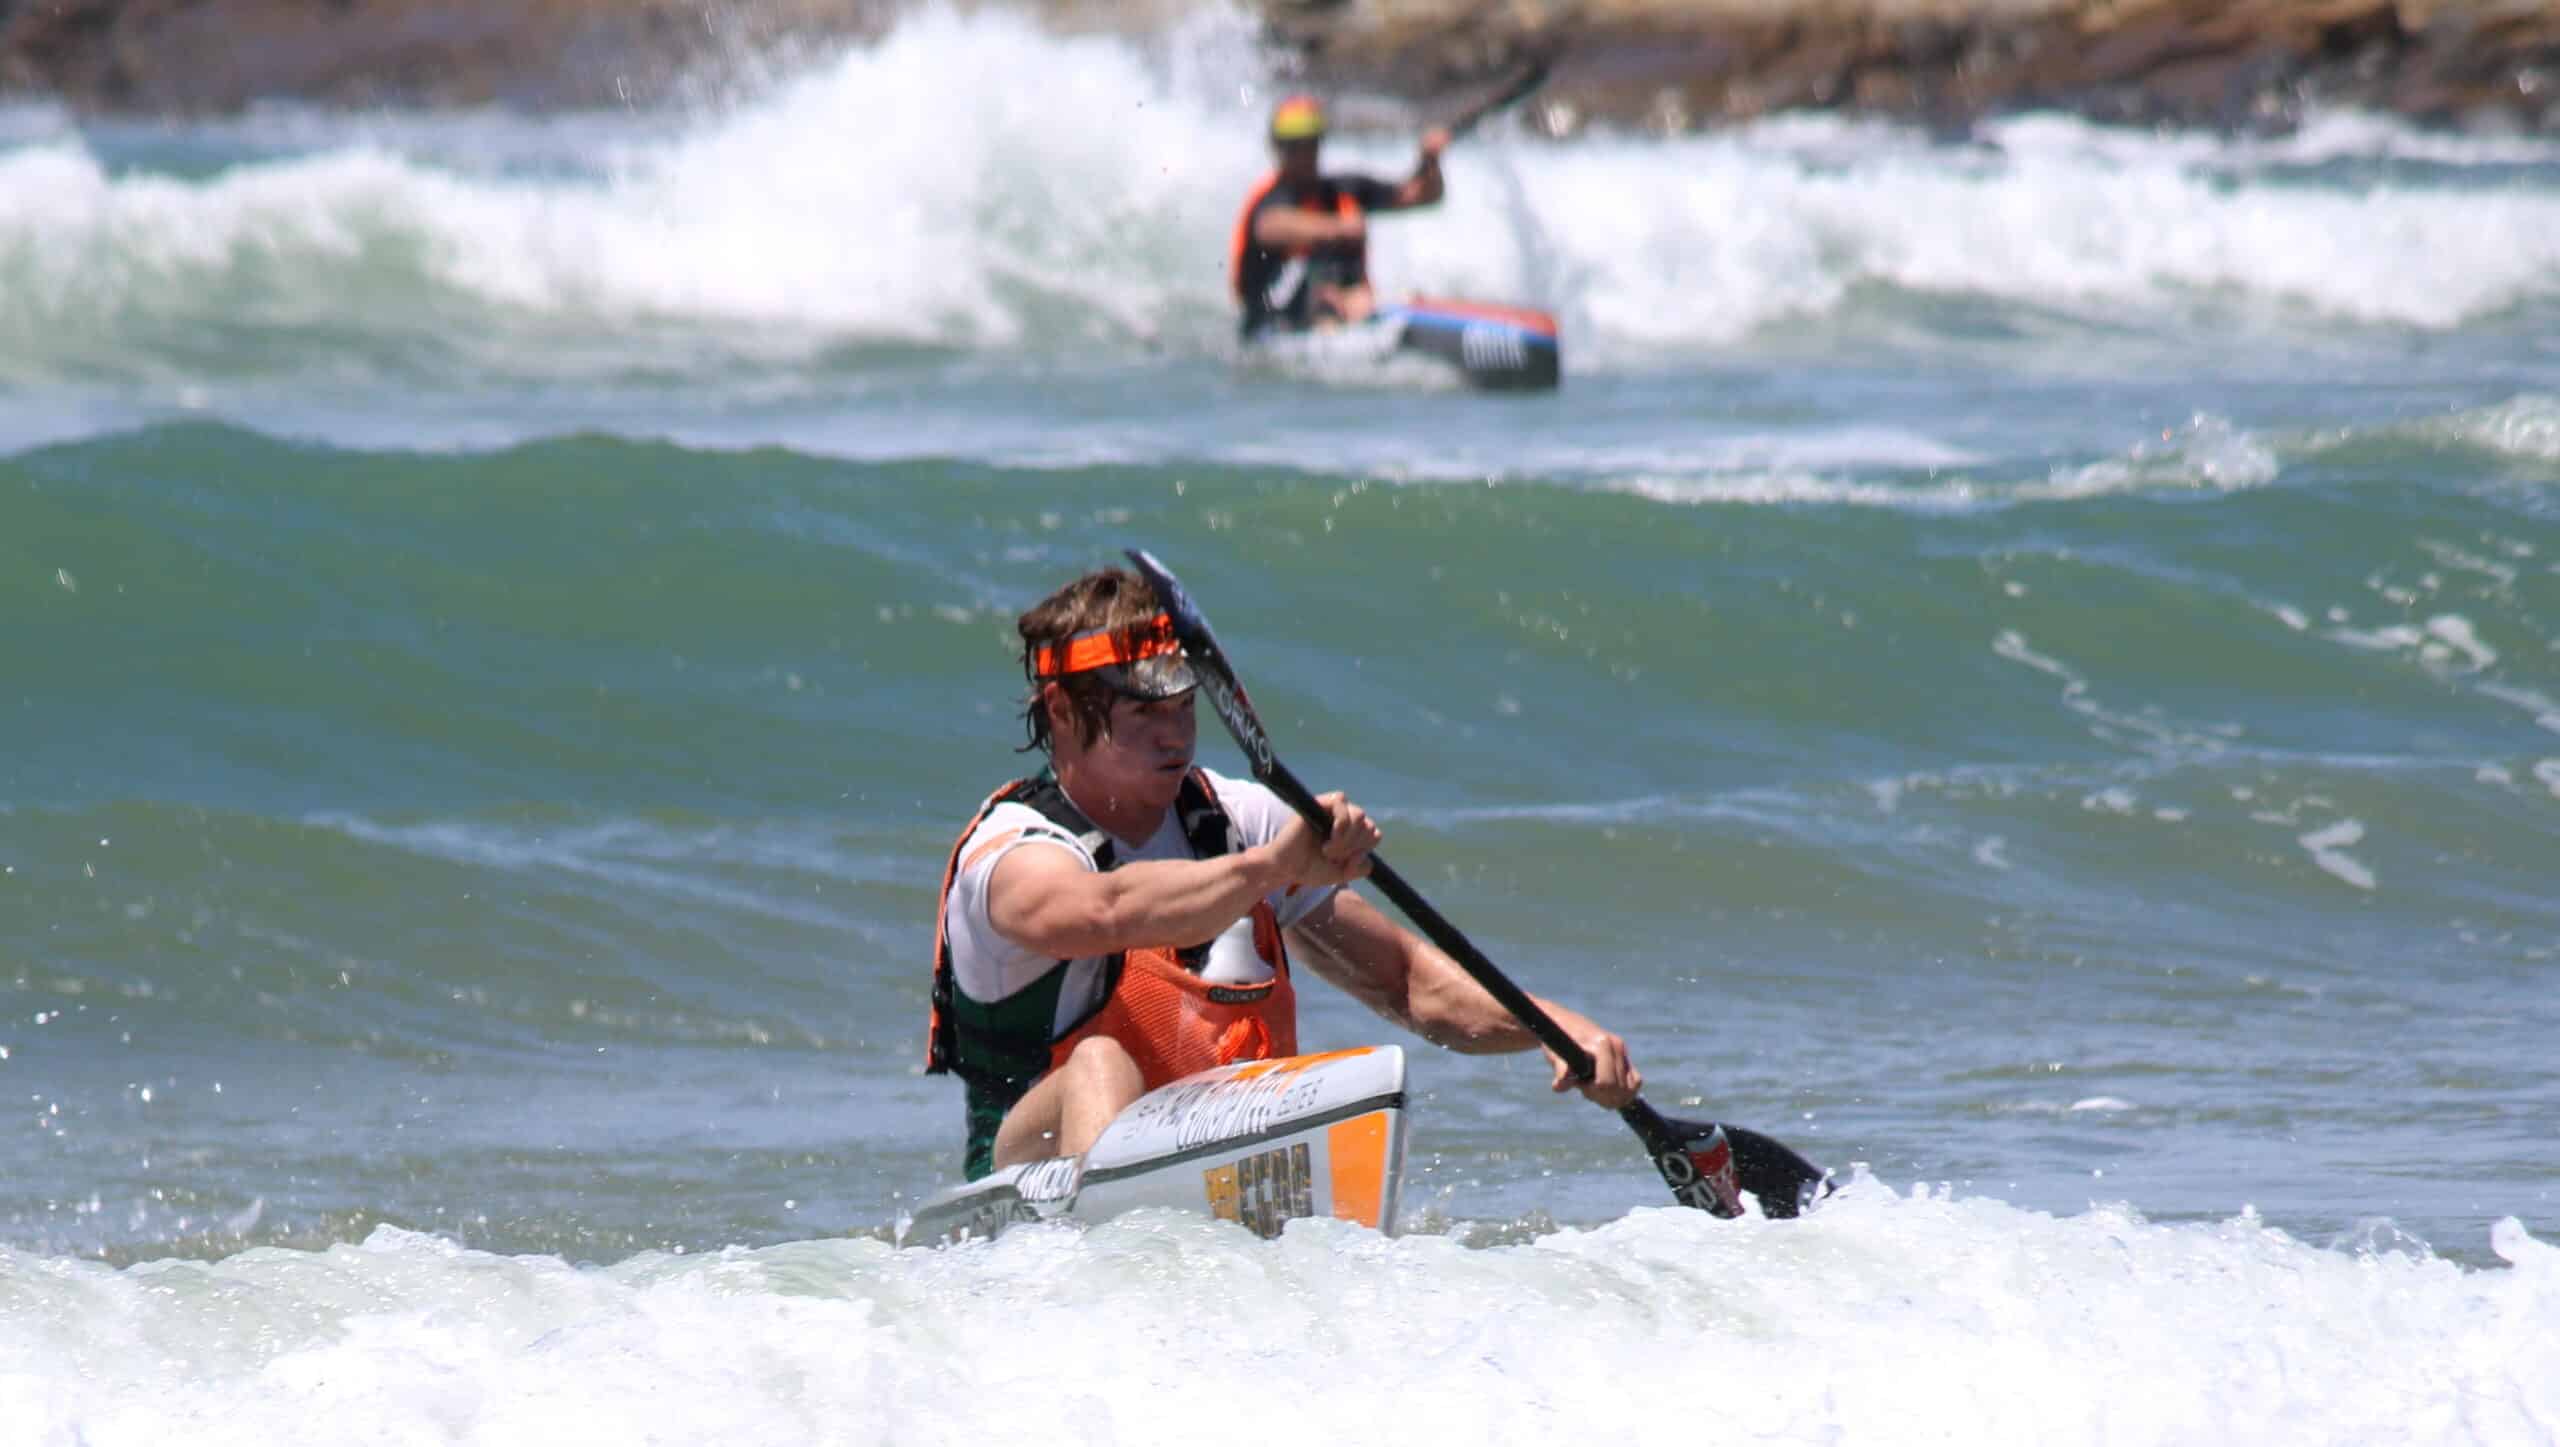 South Africa's top paddlers get ready for Pete Marlin Downwind Surf Ski Race